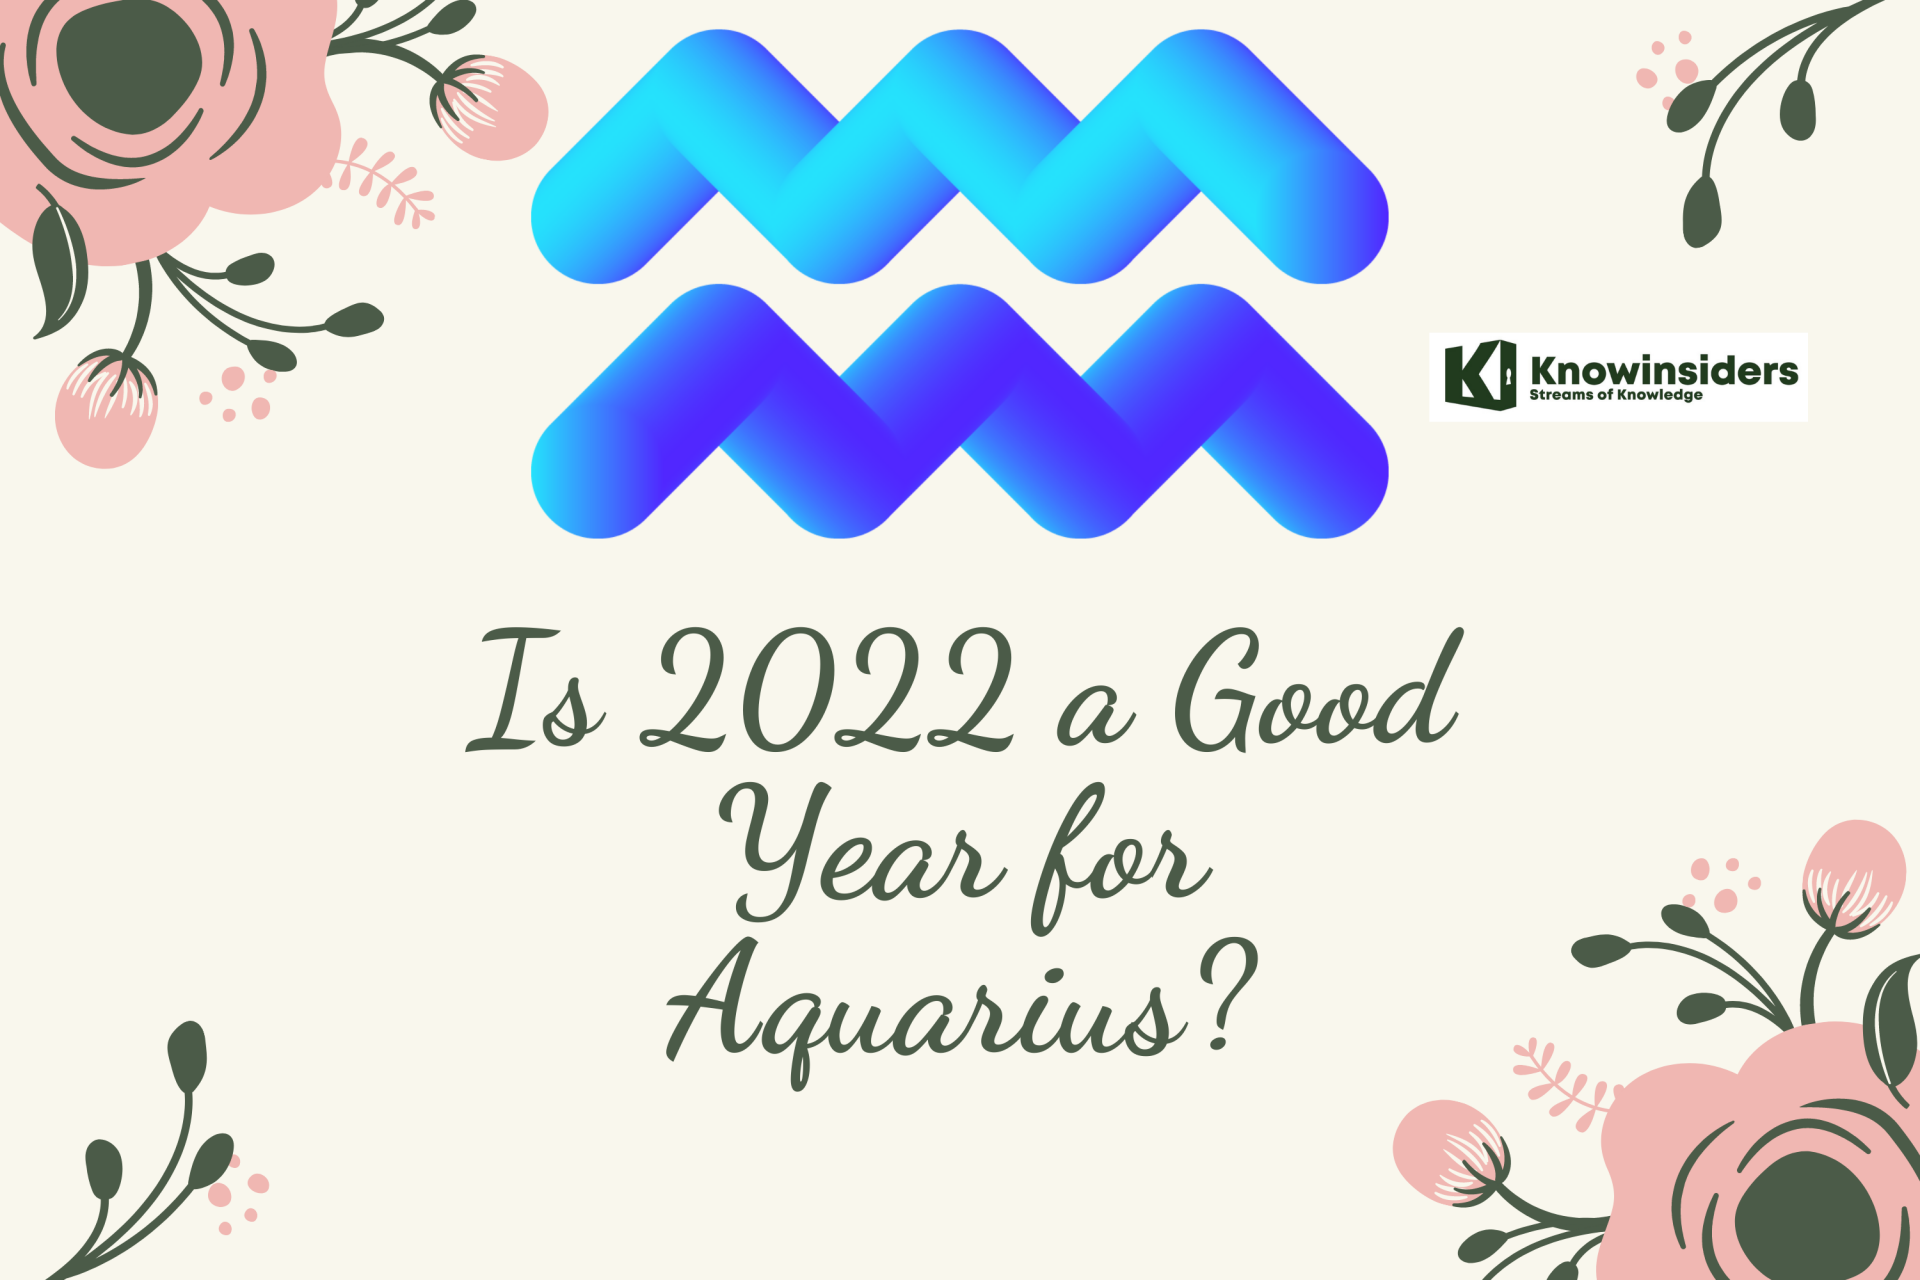 Is 2022 a Good Year for Aquarius?